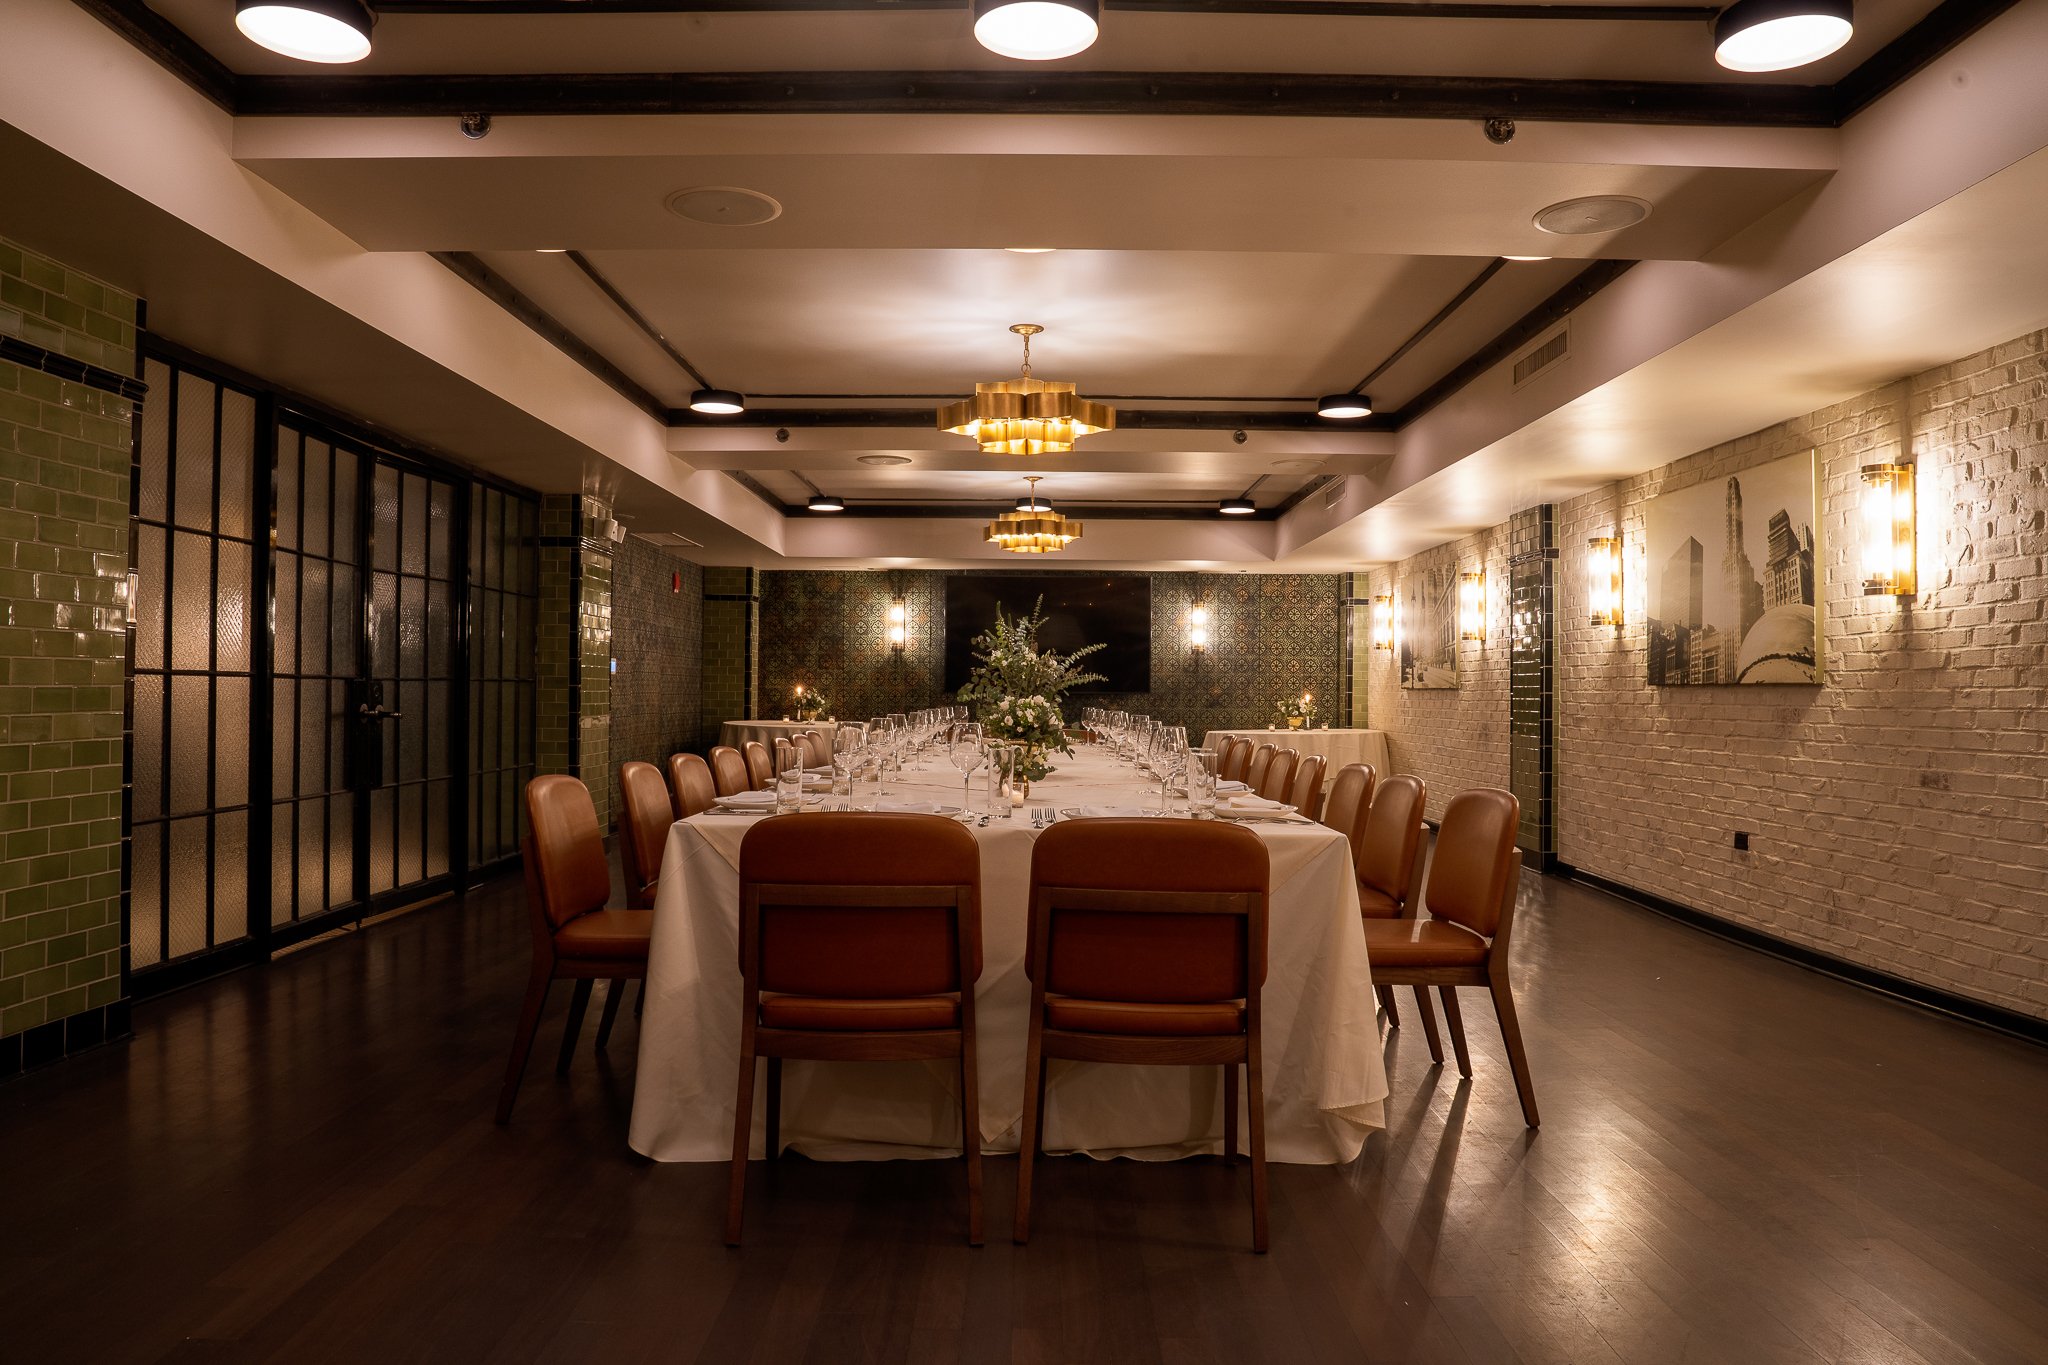 Zoomed-out view: spacious private dining room, central table, linens, floral decor.